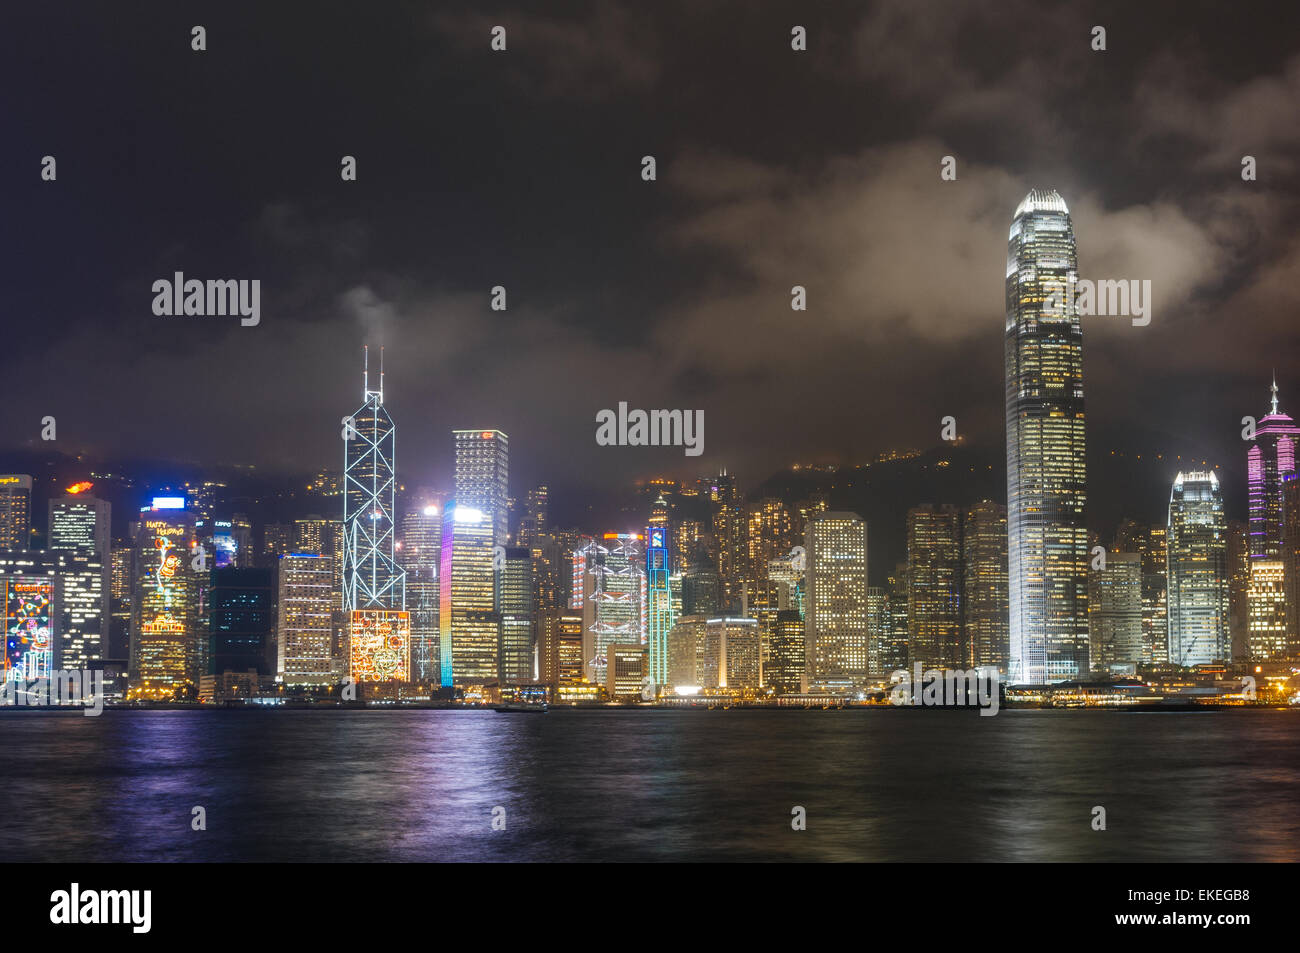 Skyline of Hong Kong Victoria Harbour at night. Stock Photo